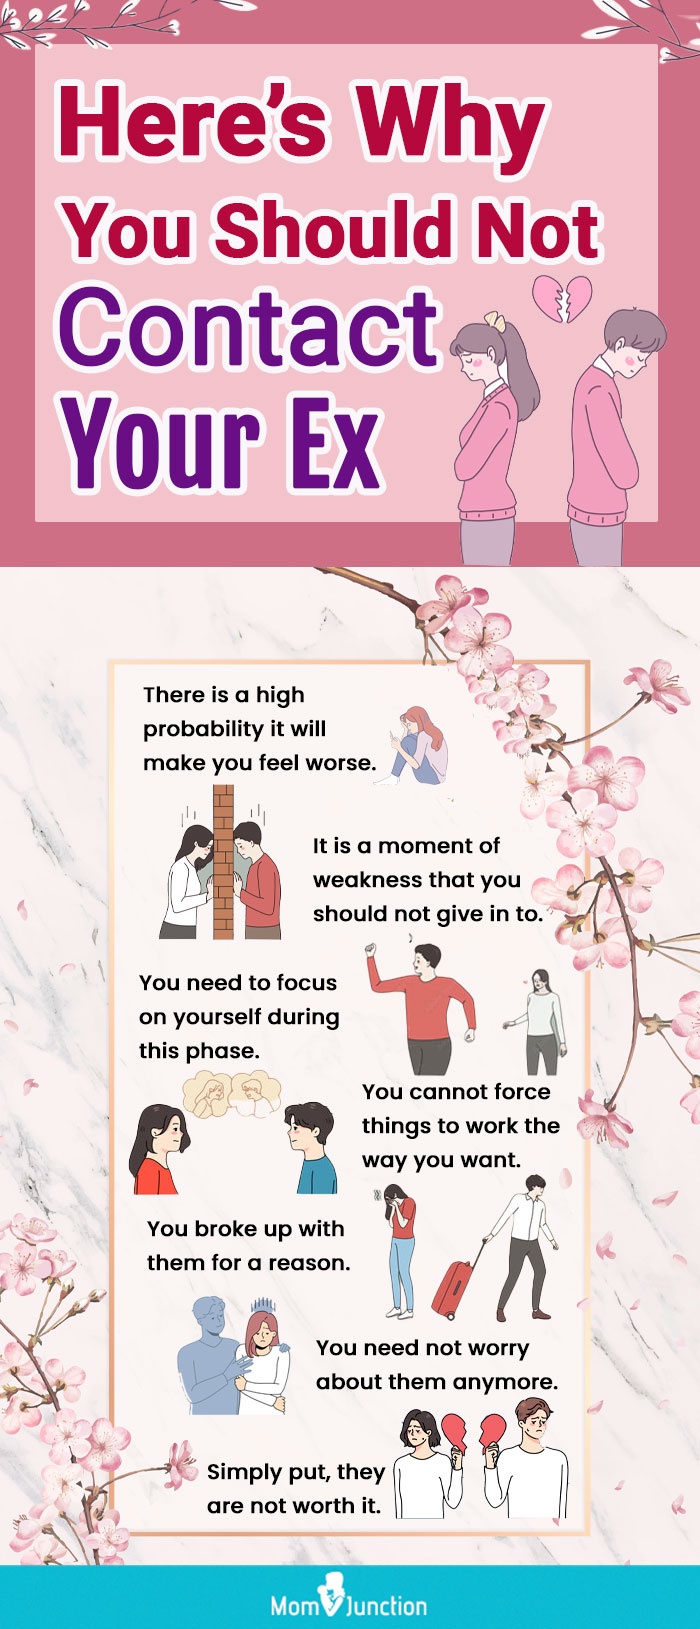 reasons to not contact your ex (infographic)